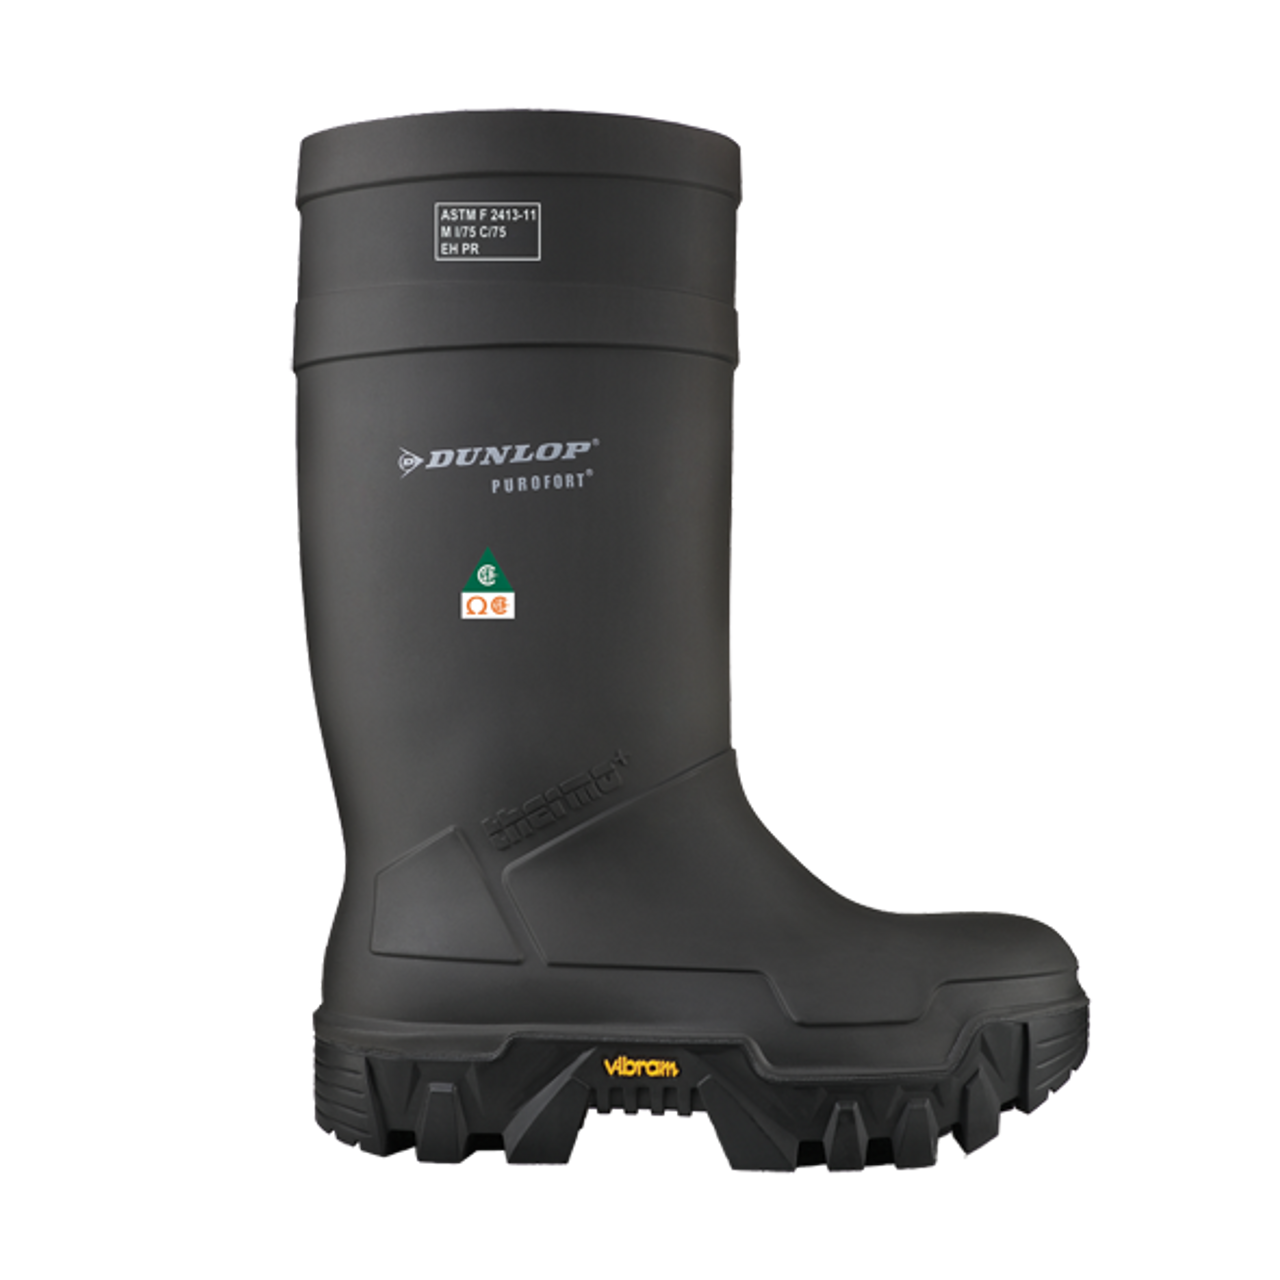 Dunlop Explorer Thermo + Full Safety Omega/EH Work Boot - Herbert's ...